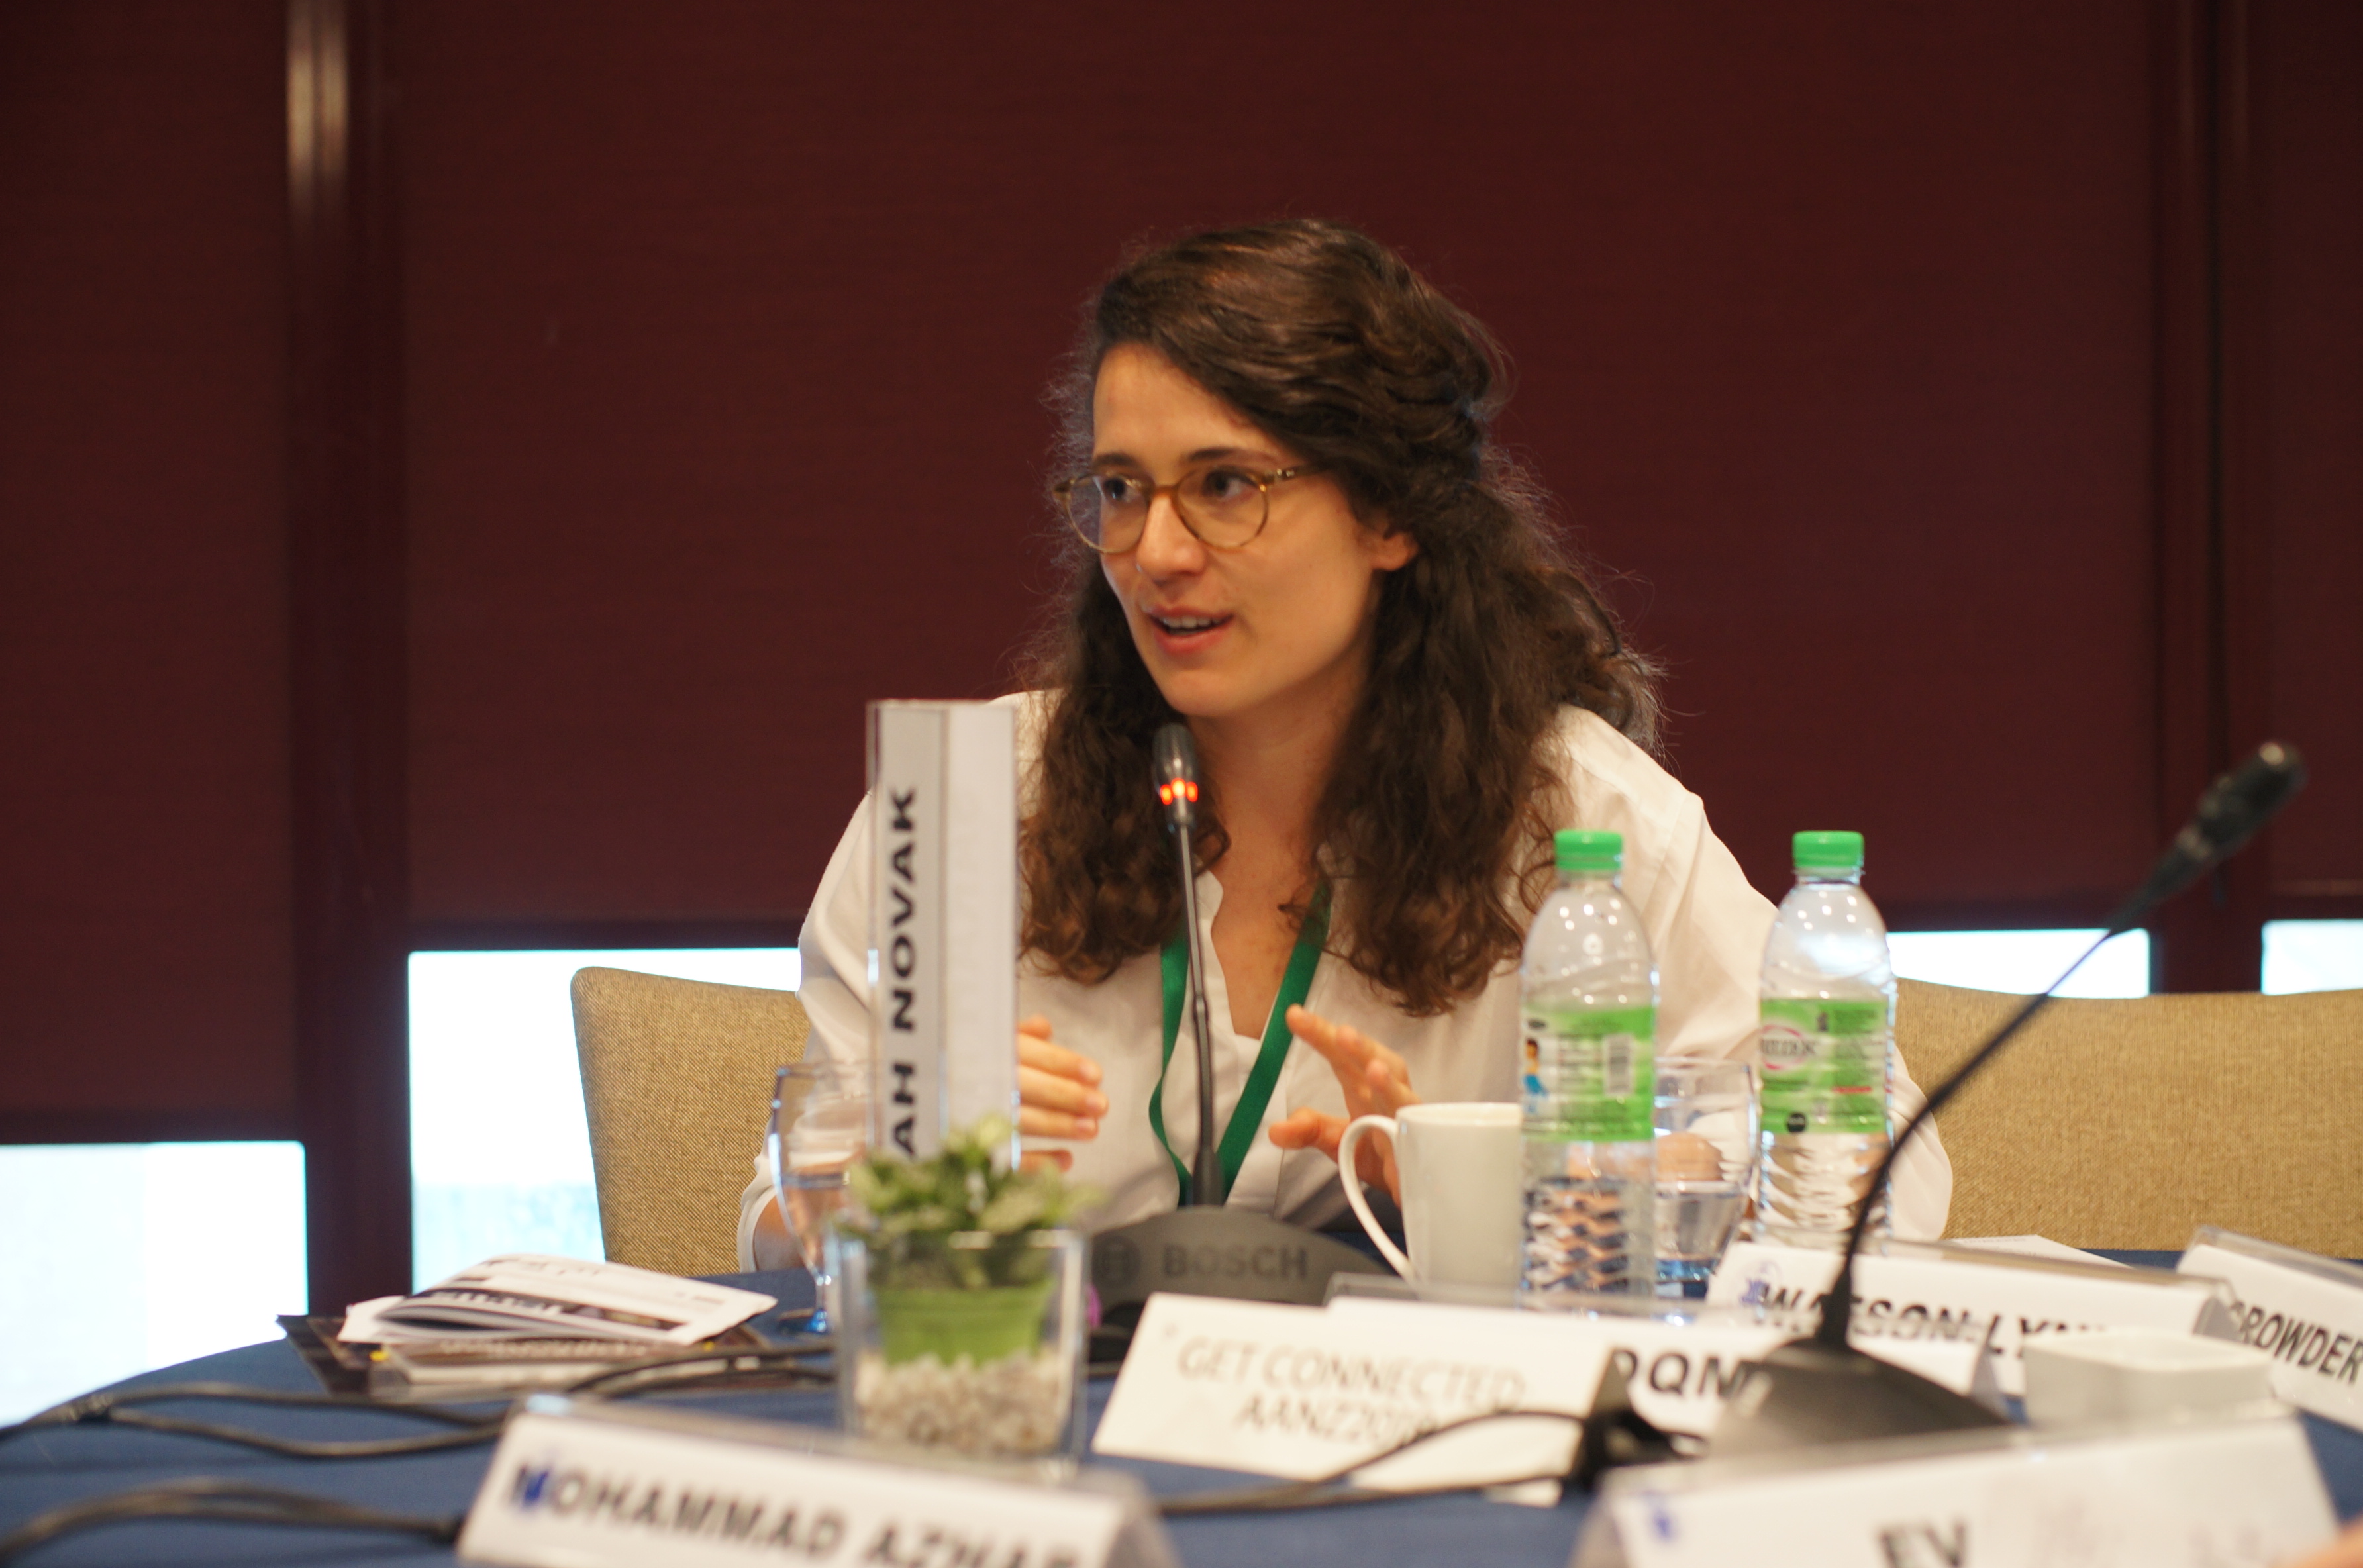 Sarah Novak sitting at a conference table